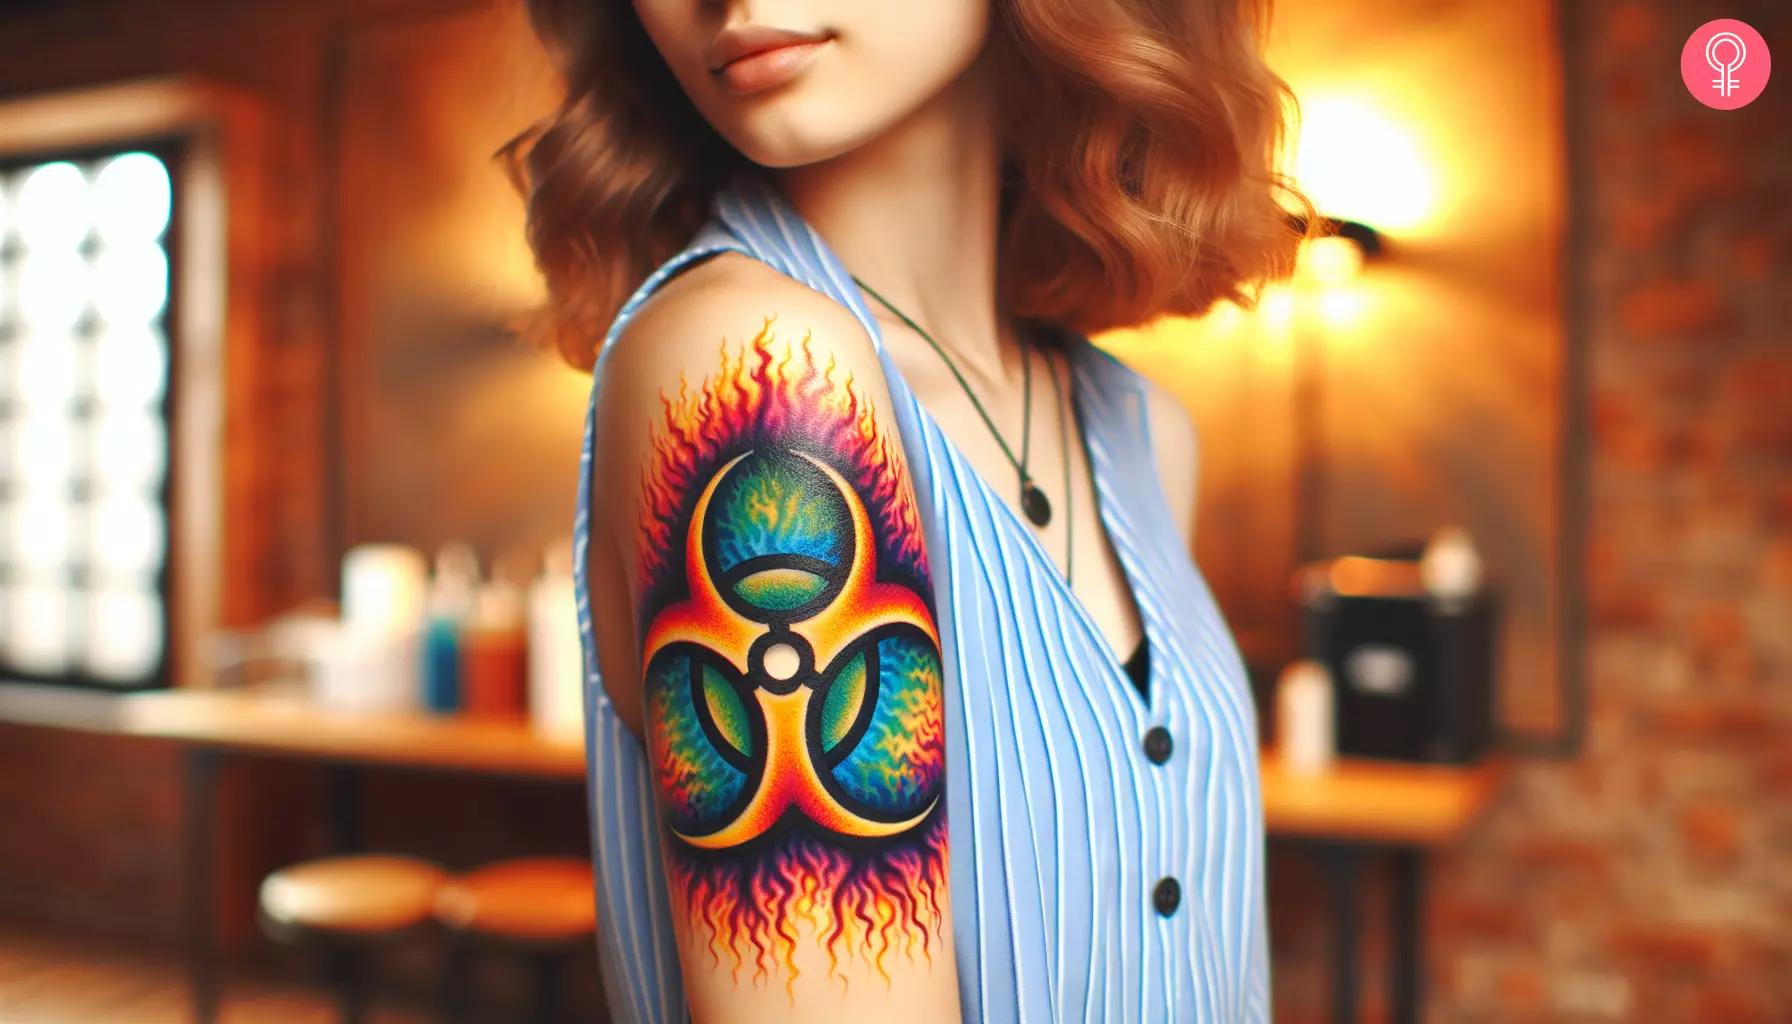 A woman with a vibrant biohazard tattoo on her upper arm